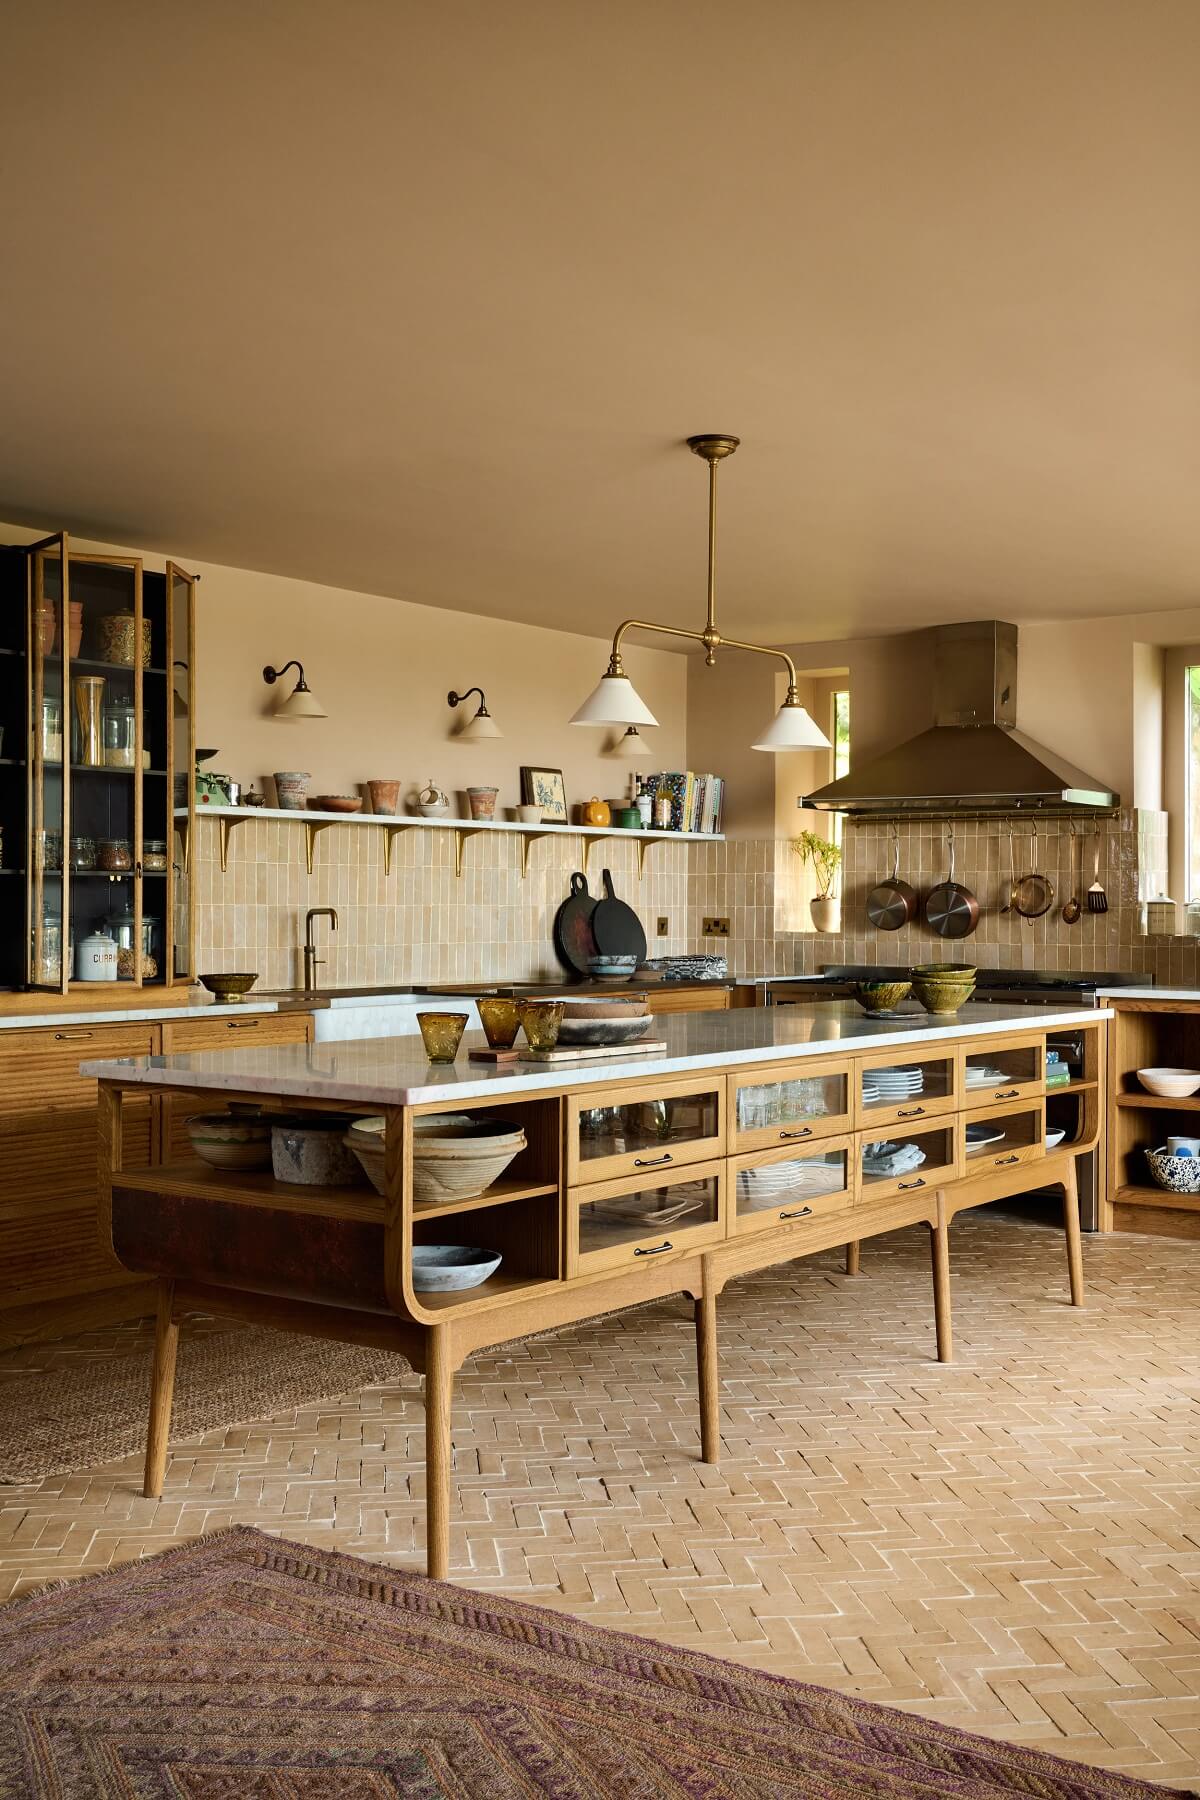 A deVOL Haberdasher’s Kitchen for the Owner of Bert & May